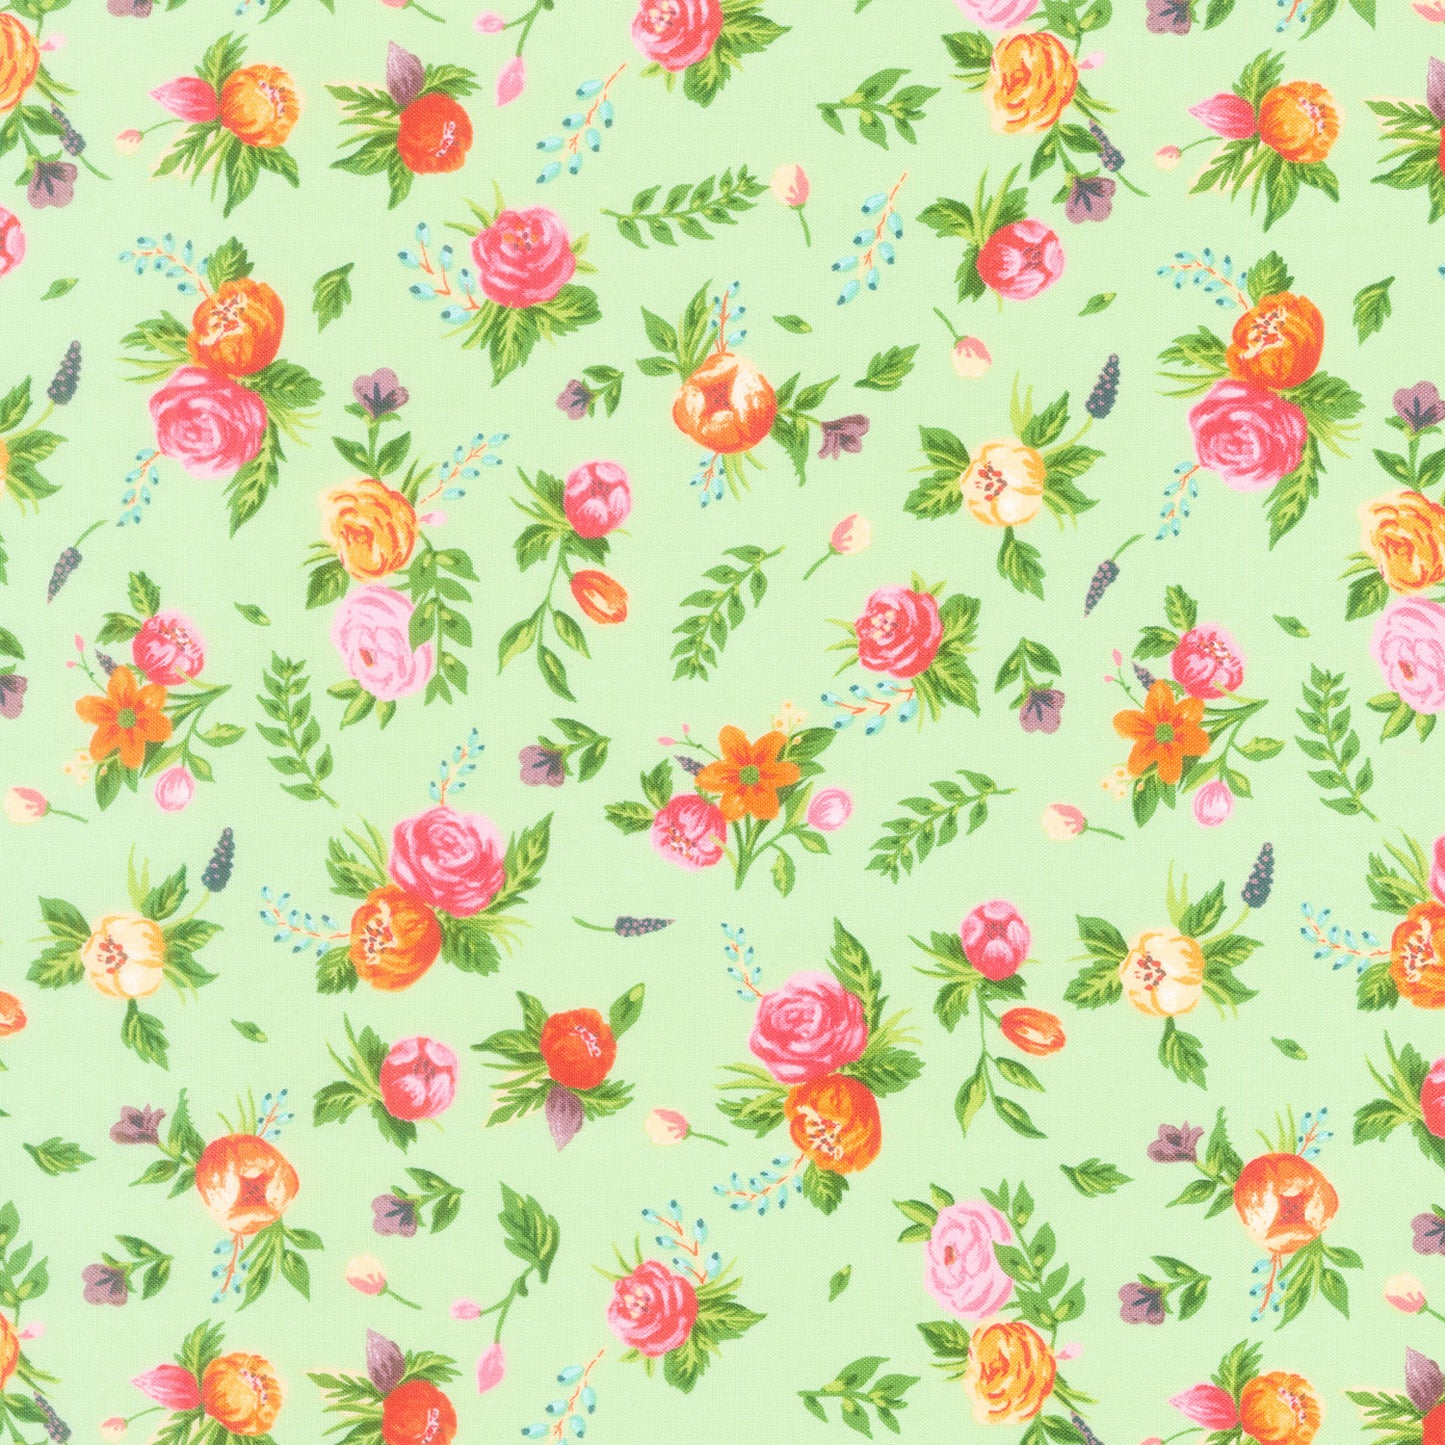 Monthly Placemat Coordinate - Floral Sweet Pea Yardage Primary Image